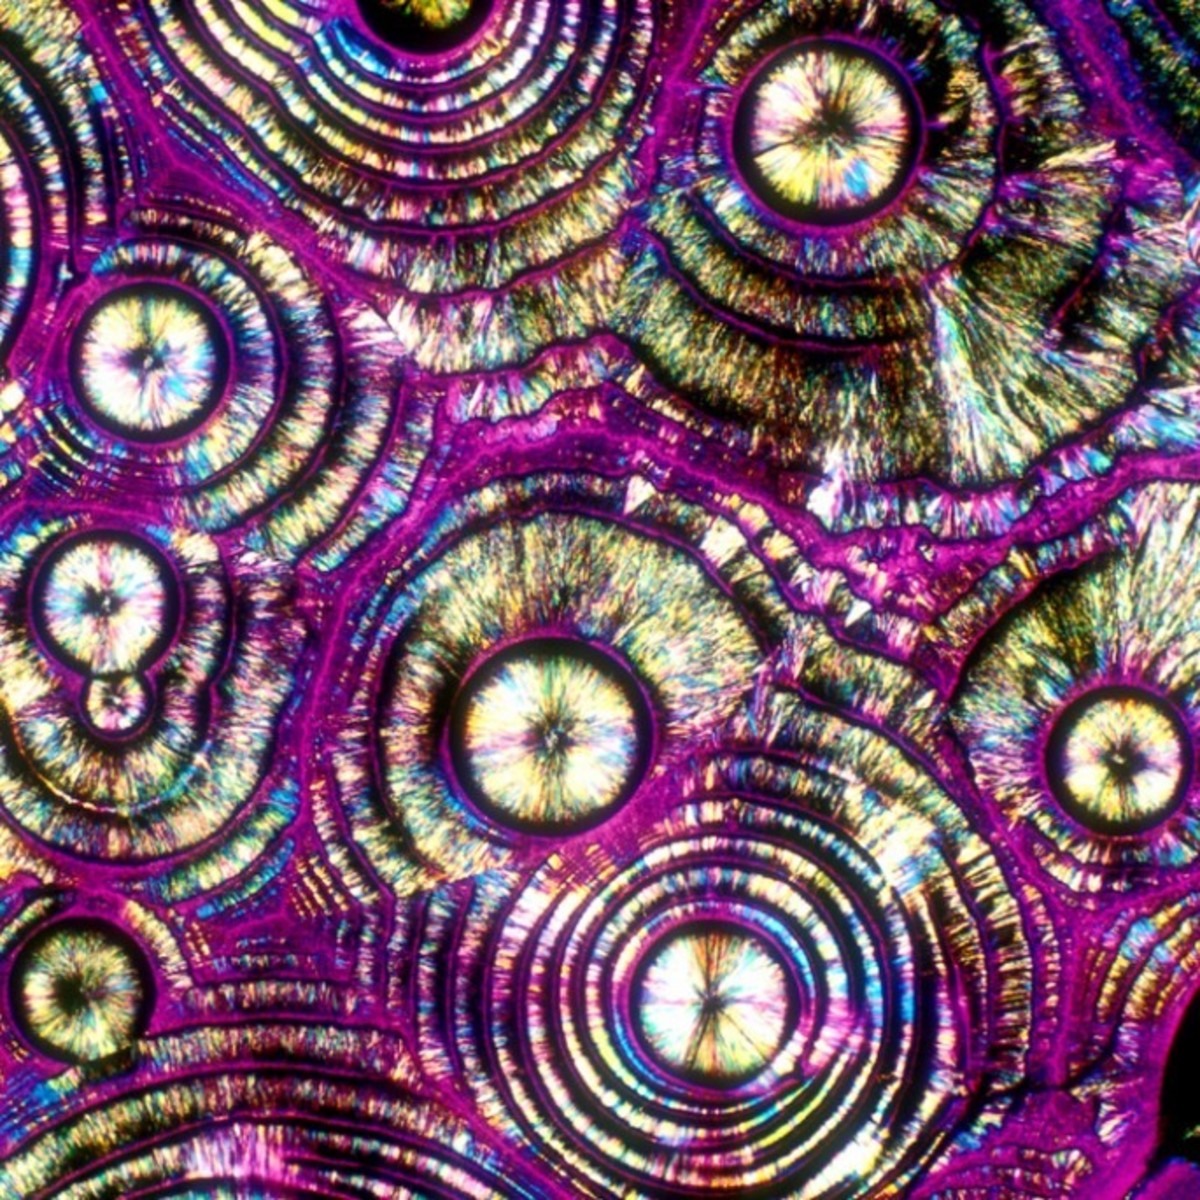 22 Different Types of Alcohol That Look Amazing Under A Microscope - Airows